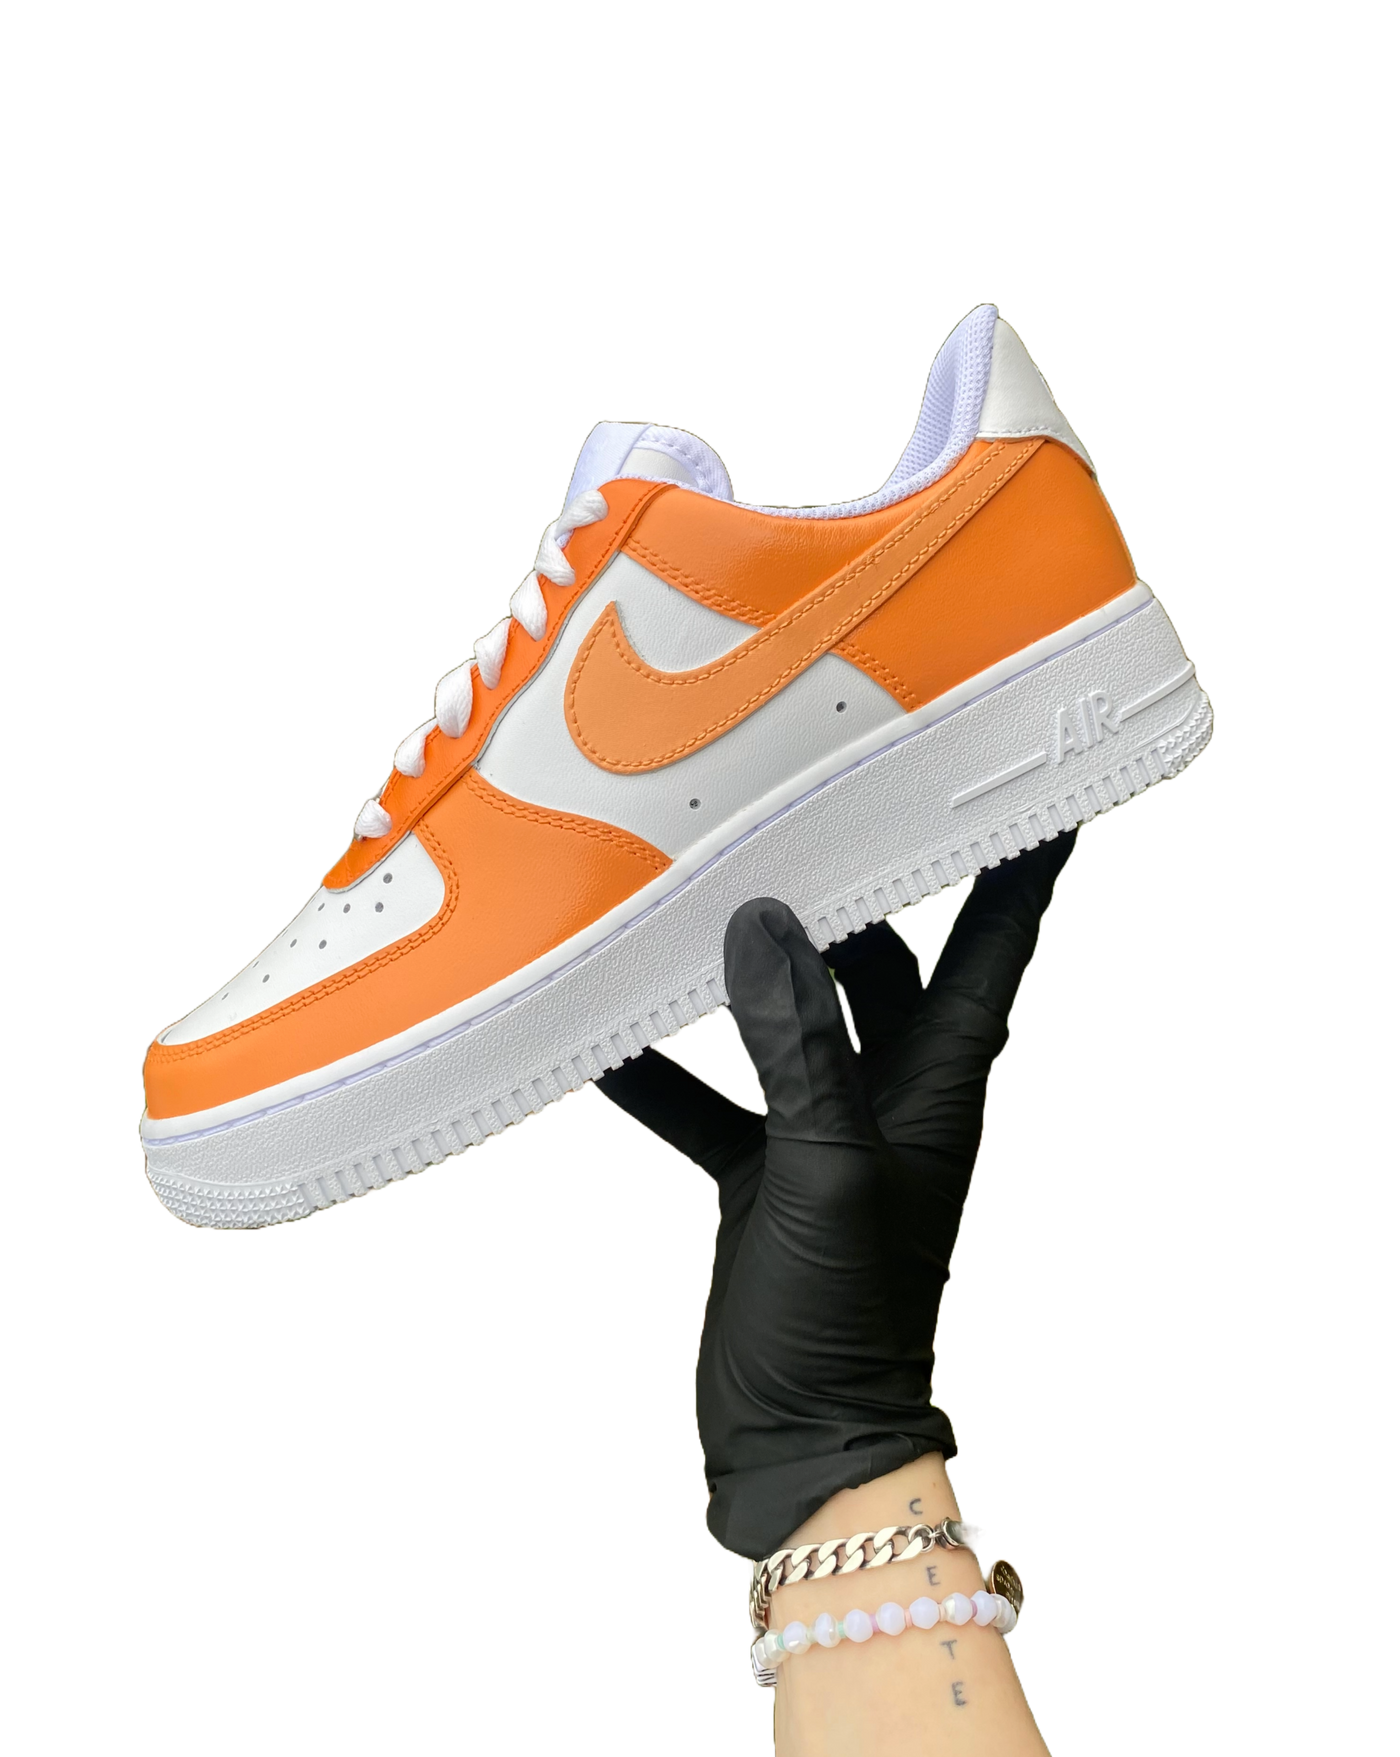 Artist's hand holding hand-painted orange colorway Air Force 1. There are 3 shades of orange worked into the colorway. Angle 1.